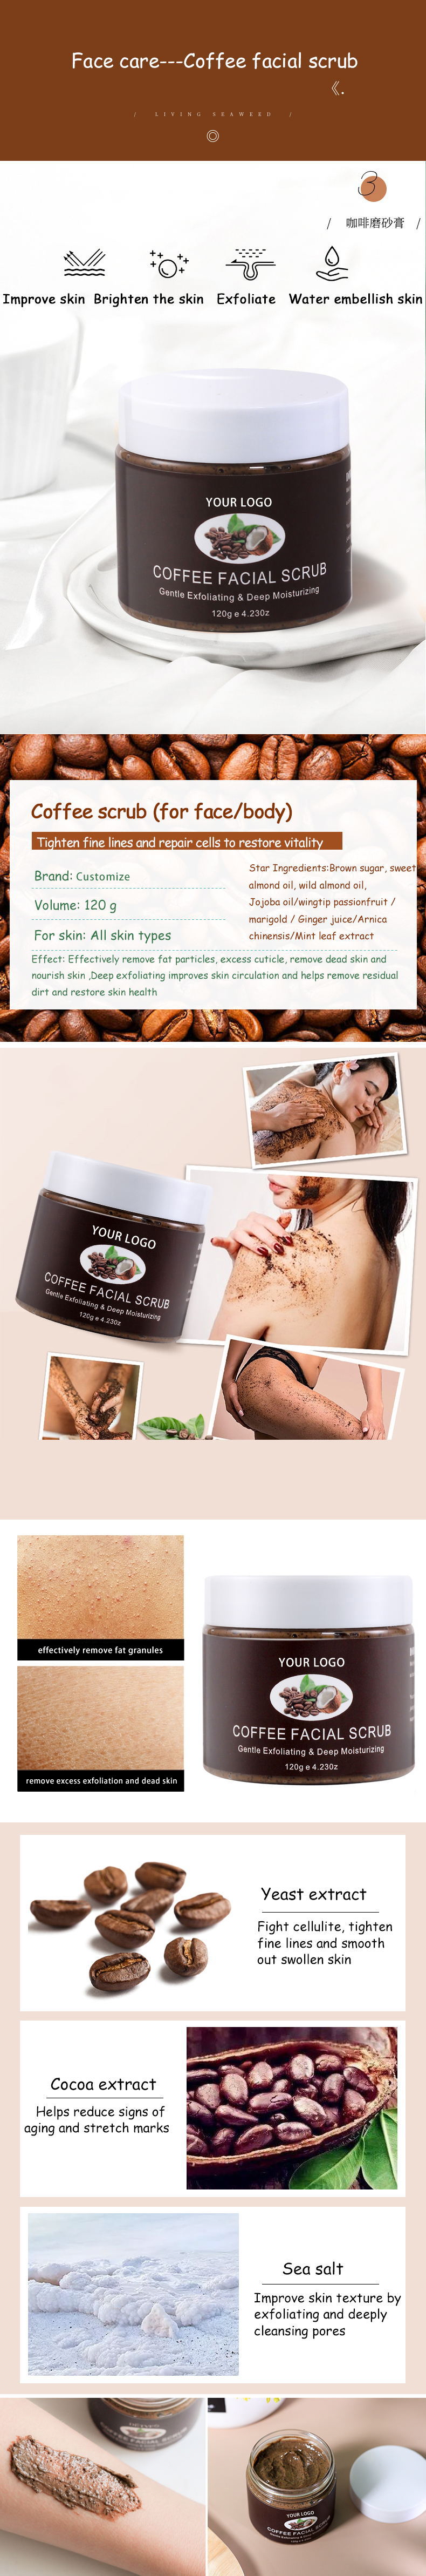 coffee facial and body scrub good for you